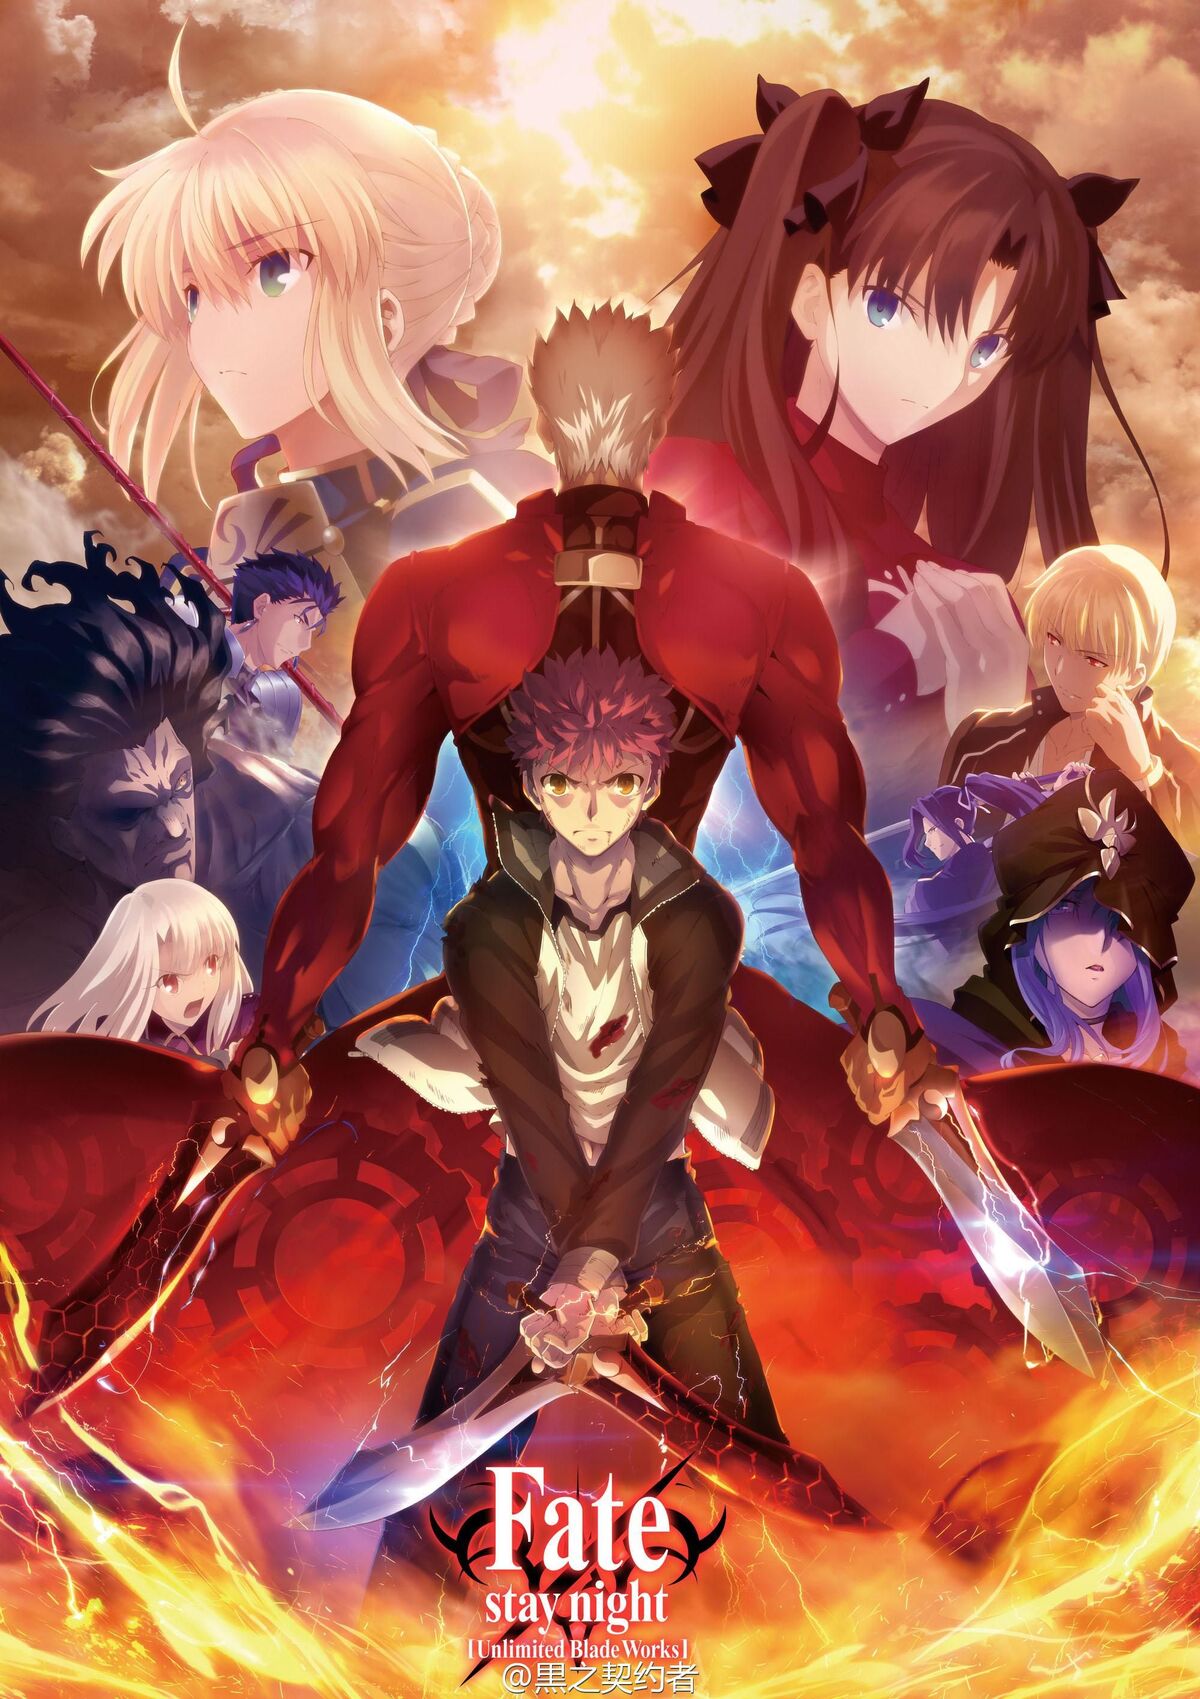 Fate/stay night: Unlimited Blade Works (series) | Dubbing Wikia 